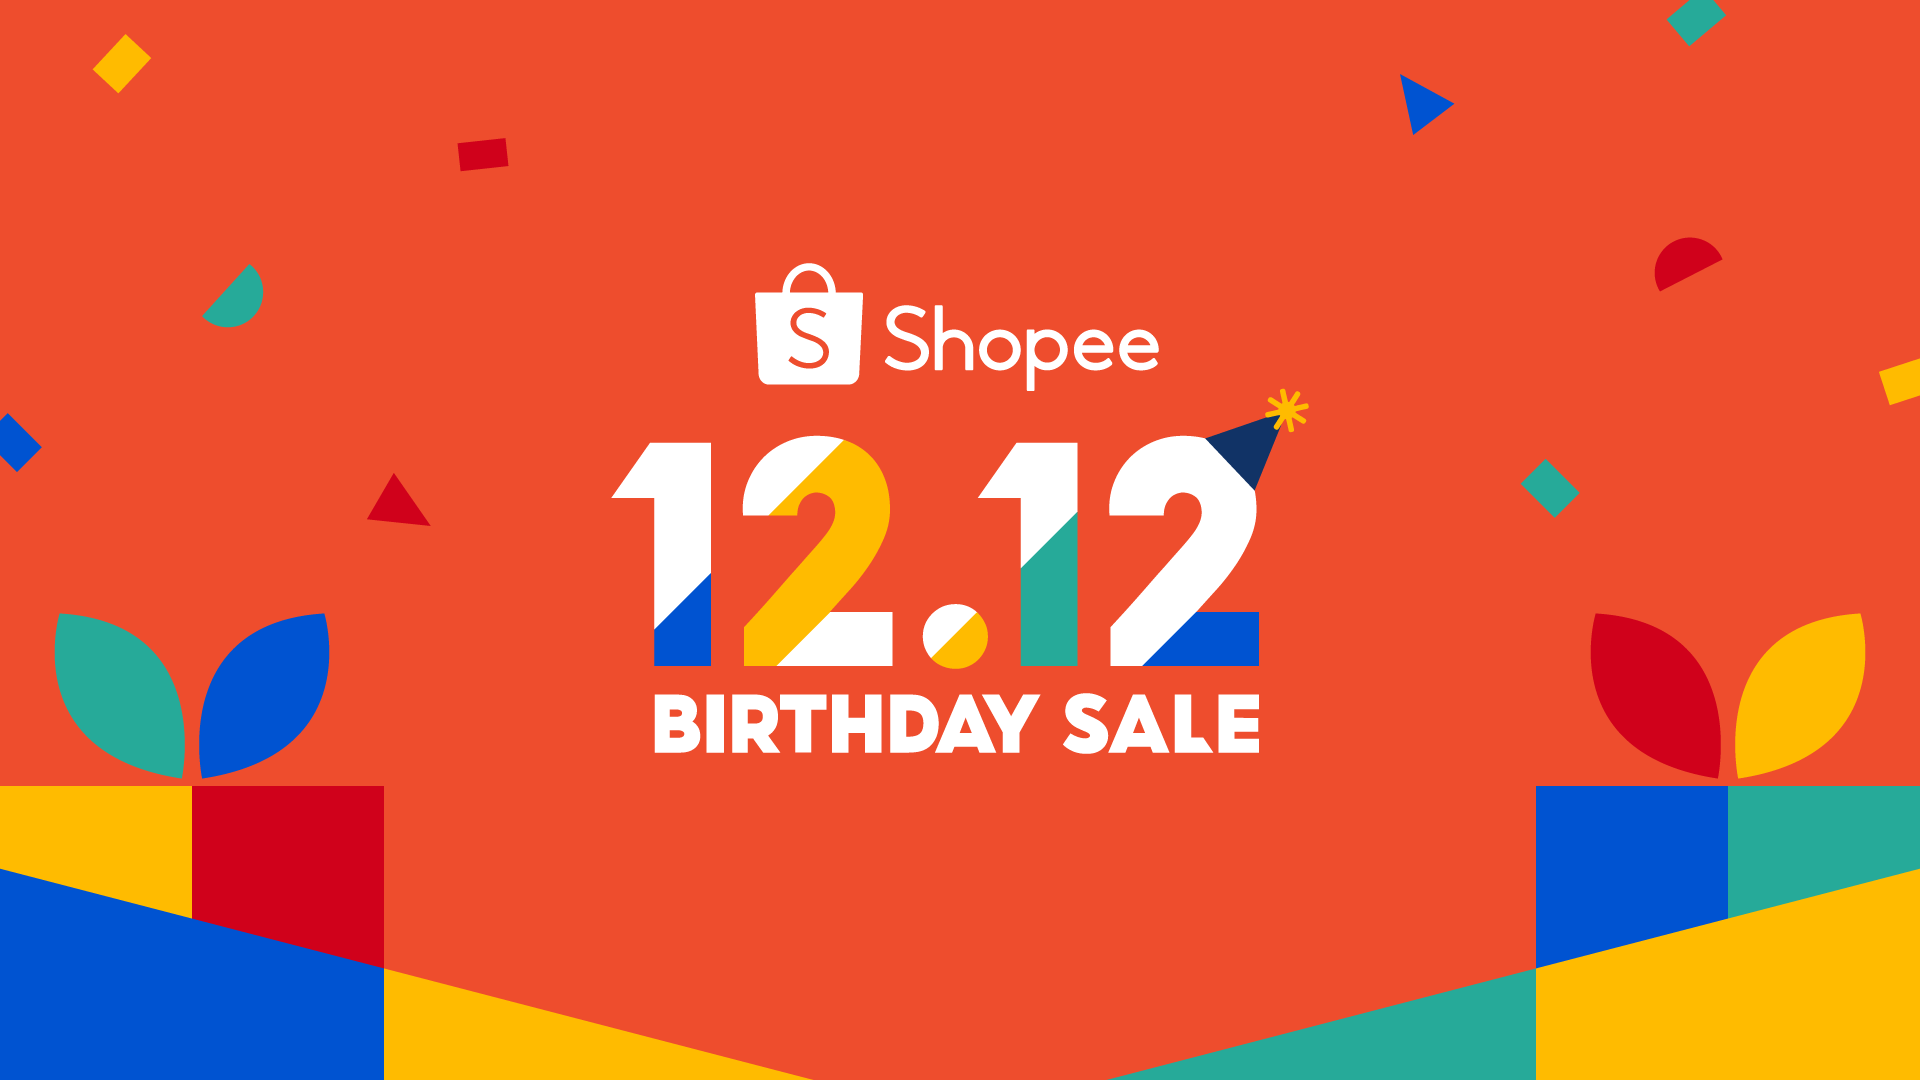 B2bShopee's 12.12 birthday celebration celebrates the grand opening and happy ending of the year-end promotion season